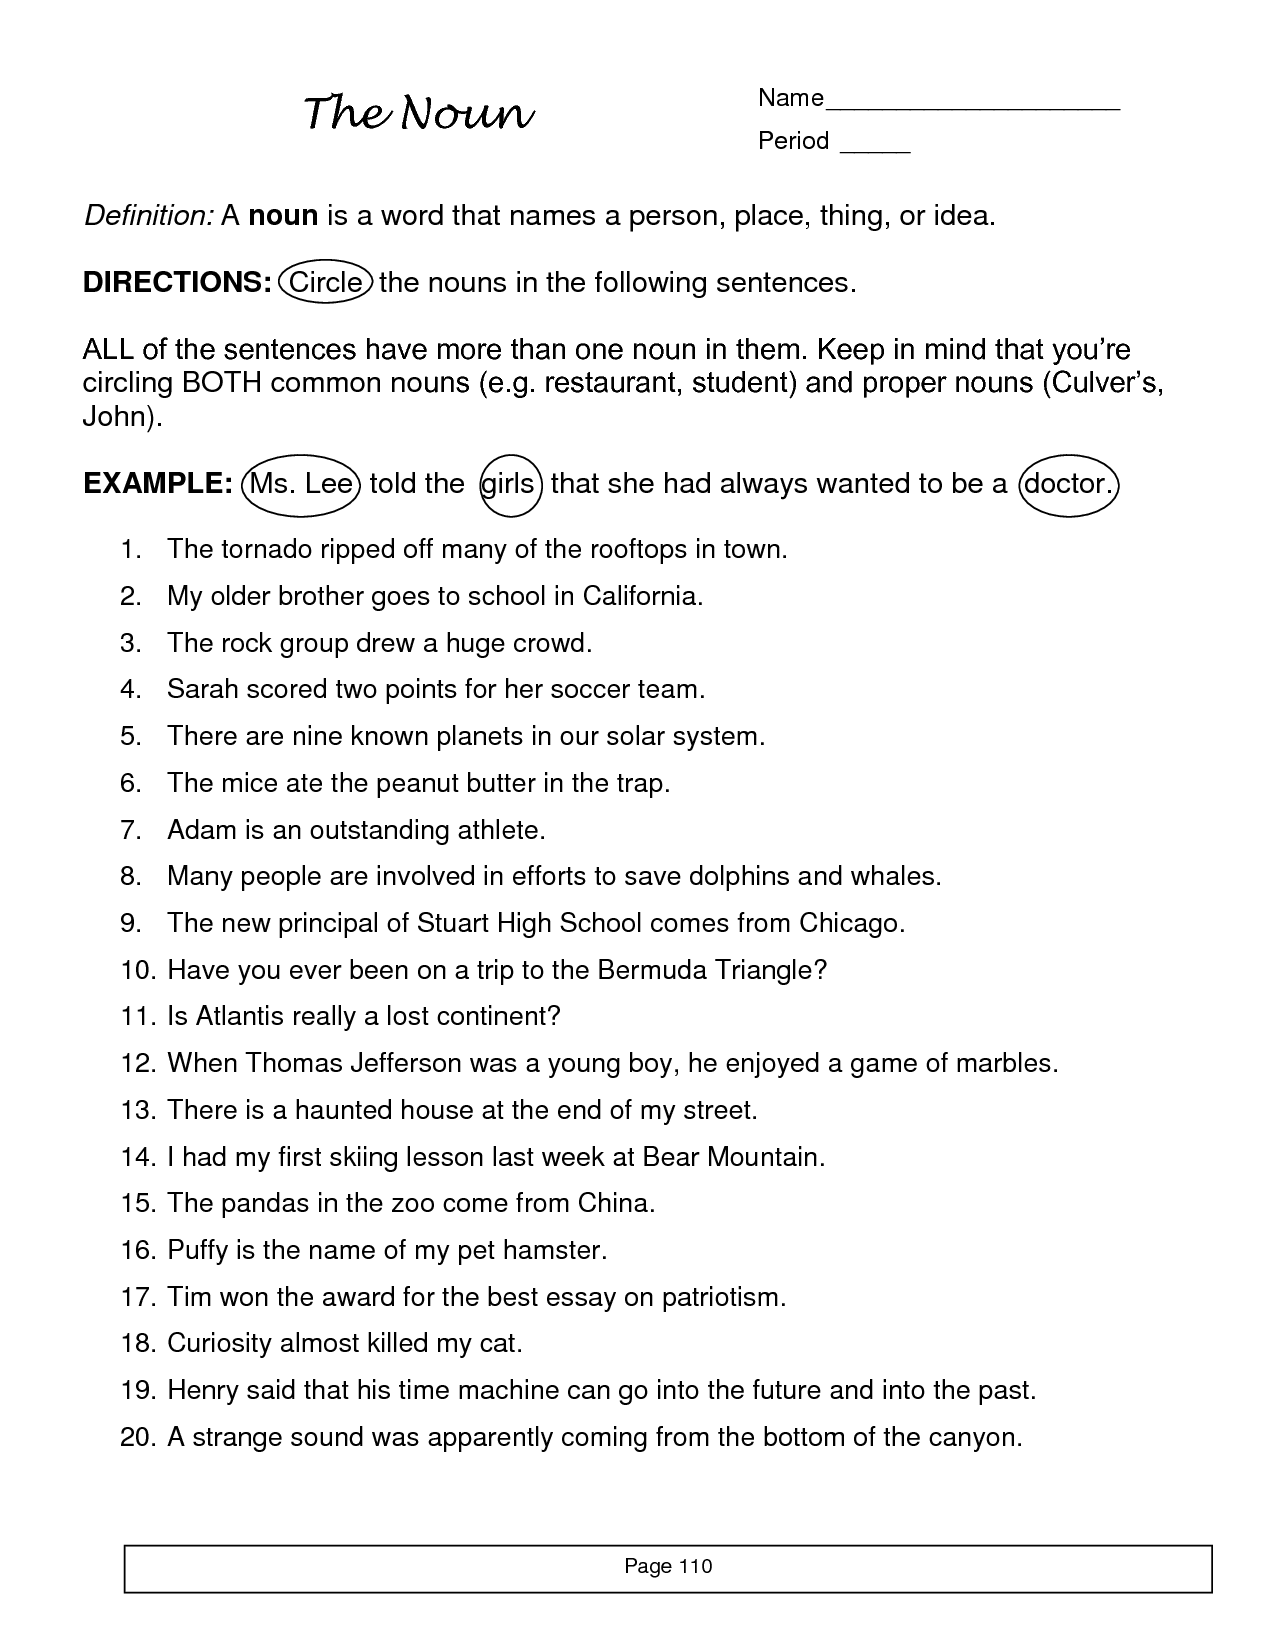 18-best-images-of-action-verb-printable-worksheets-action-and-linking-verbs-worksheets-action